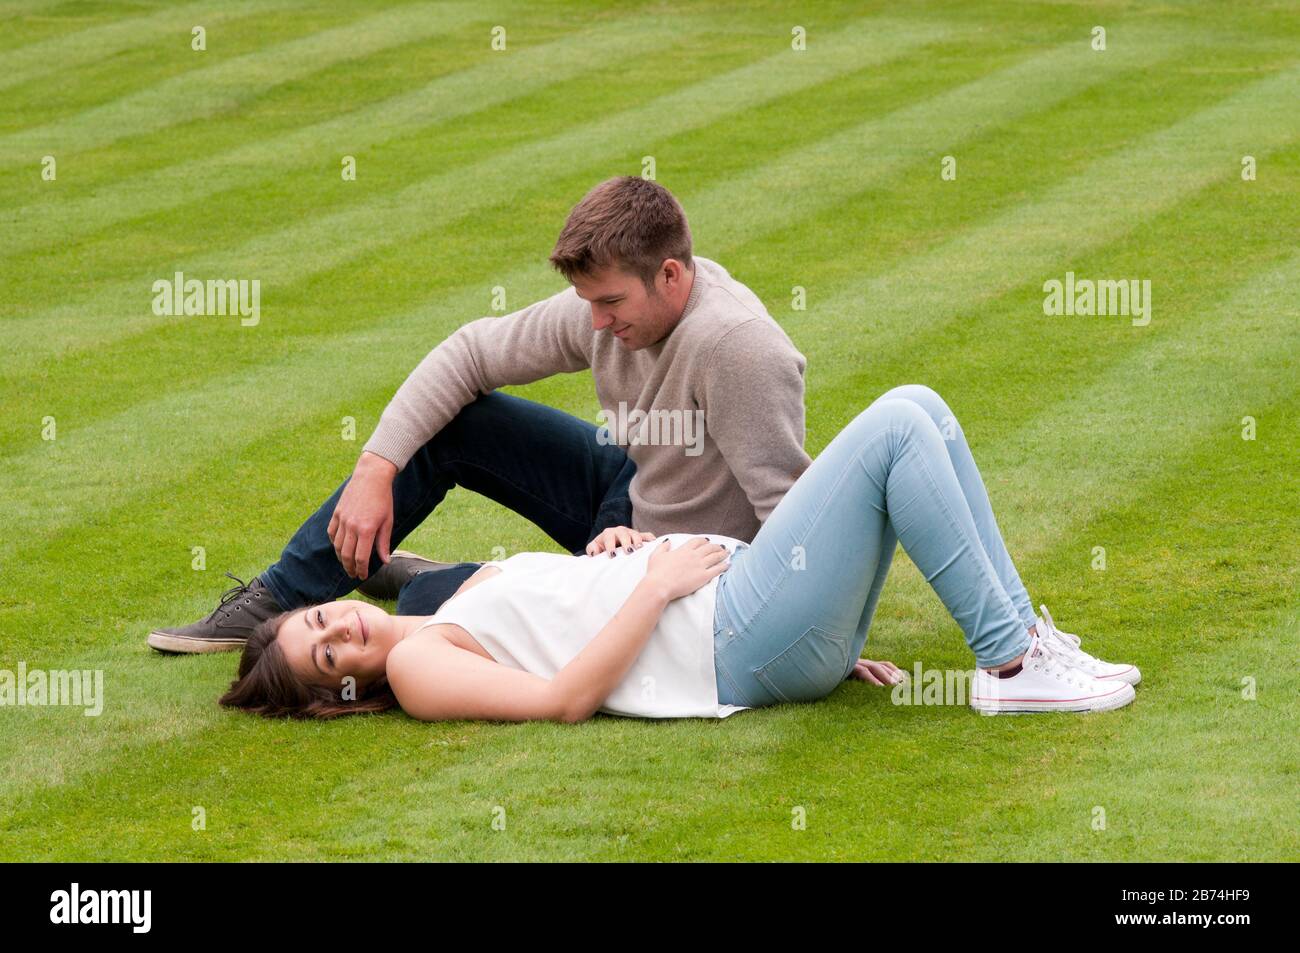 Beautiful pregnant young woman lying down on the grass with her partner sitting next to her Stock Photo